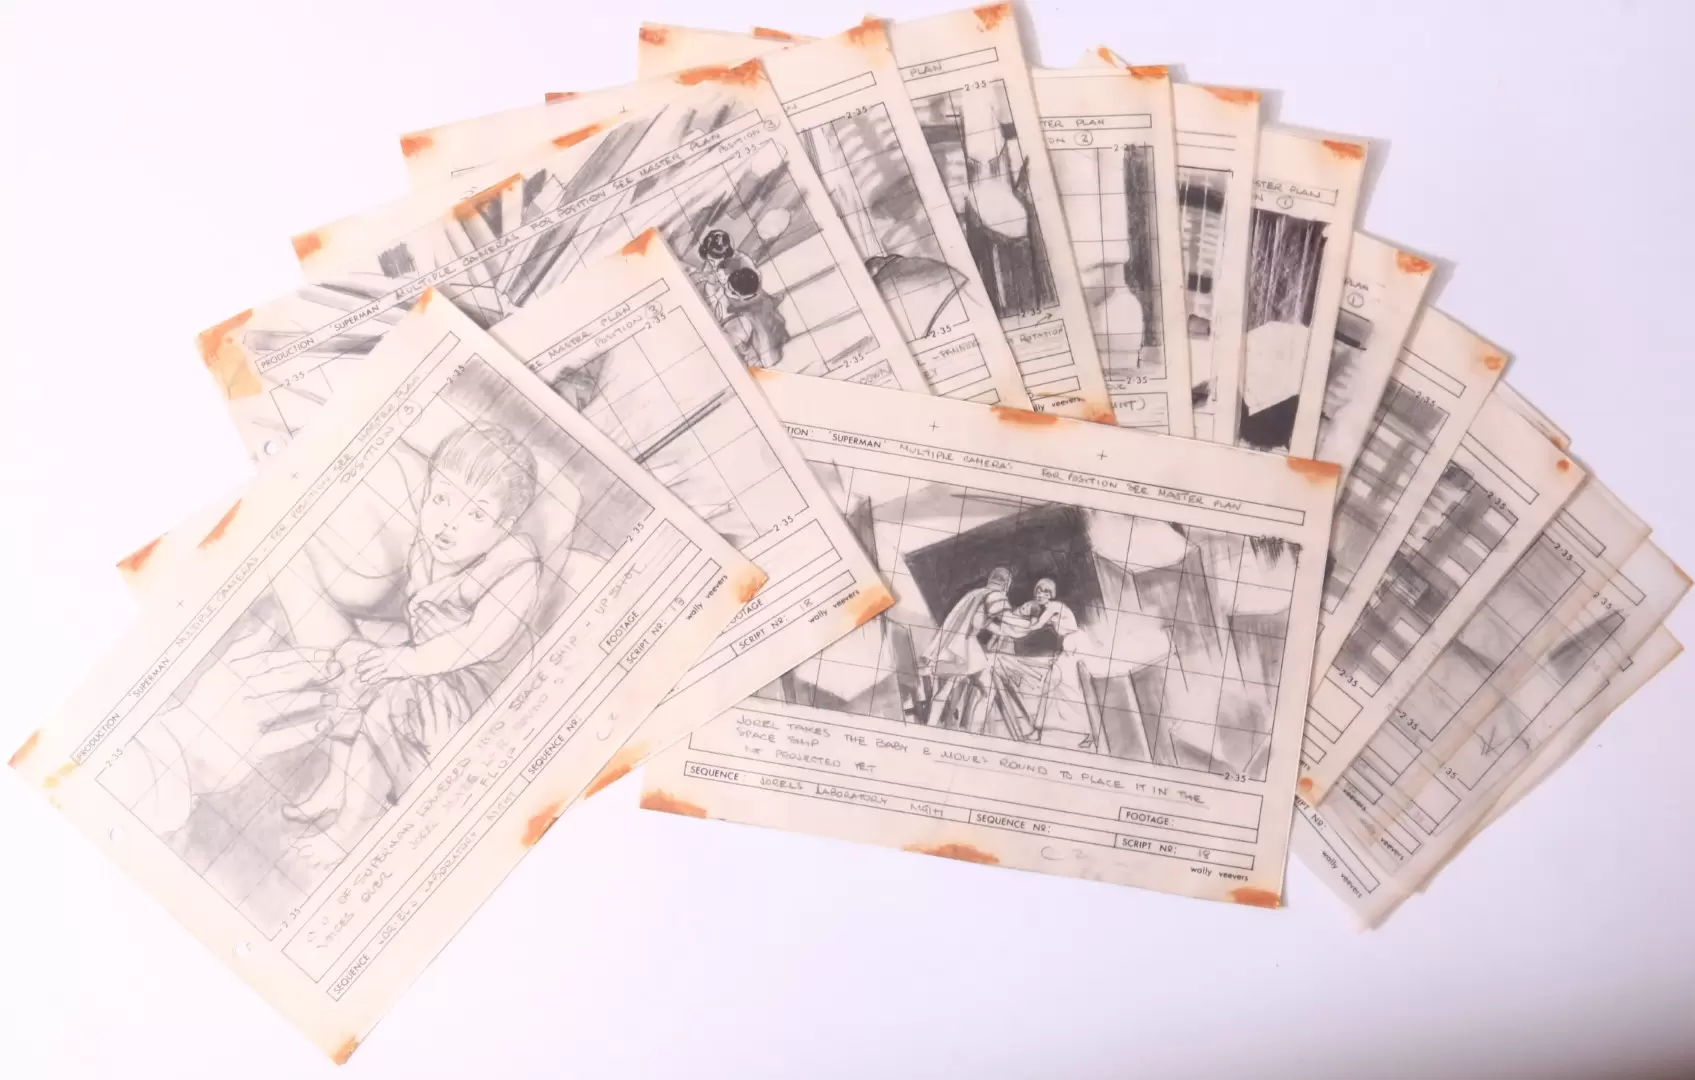 Original Superman (1978) storyboarding images to go on display at London’s Rare Book Fair